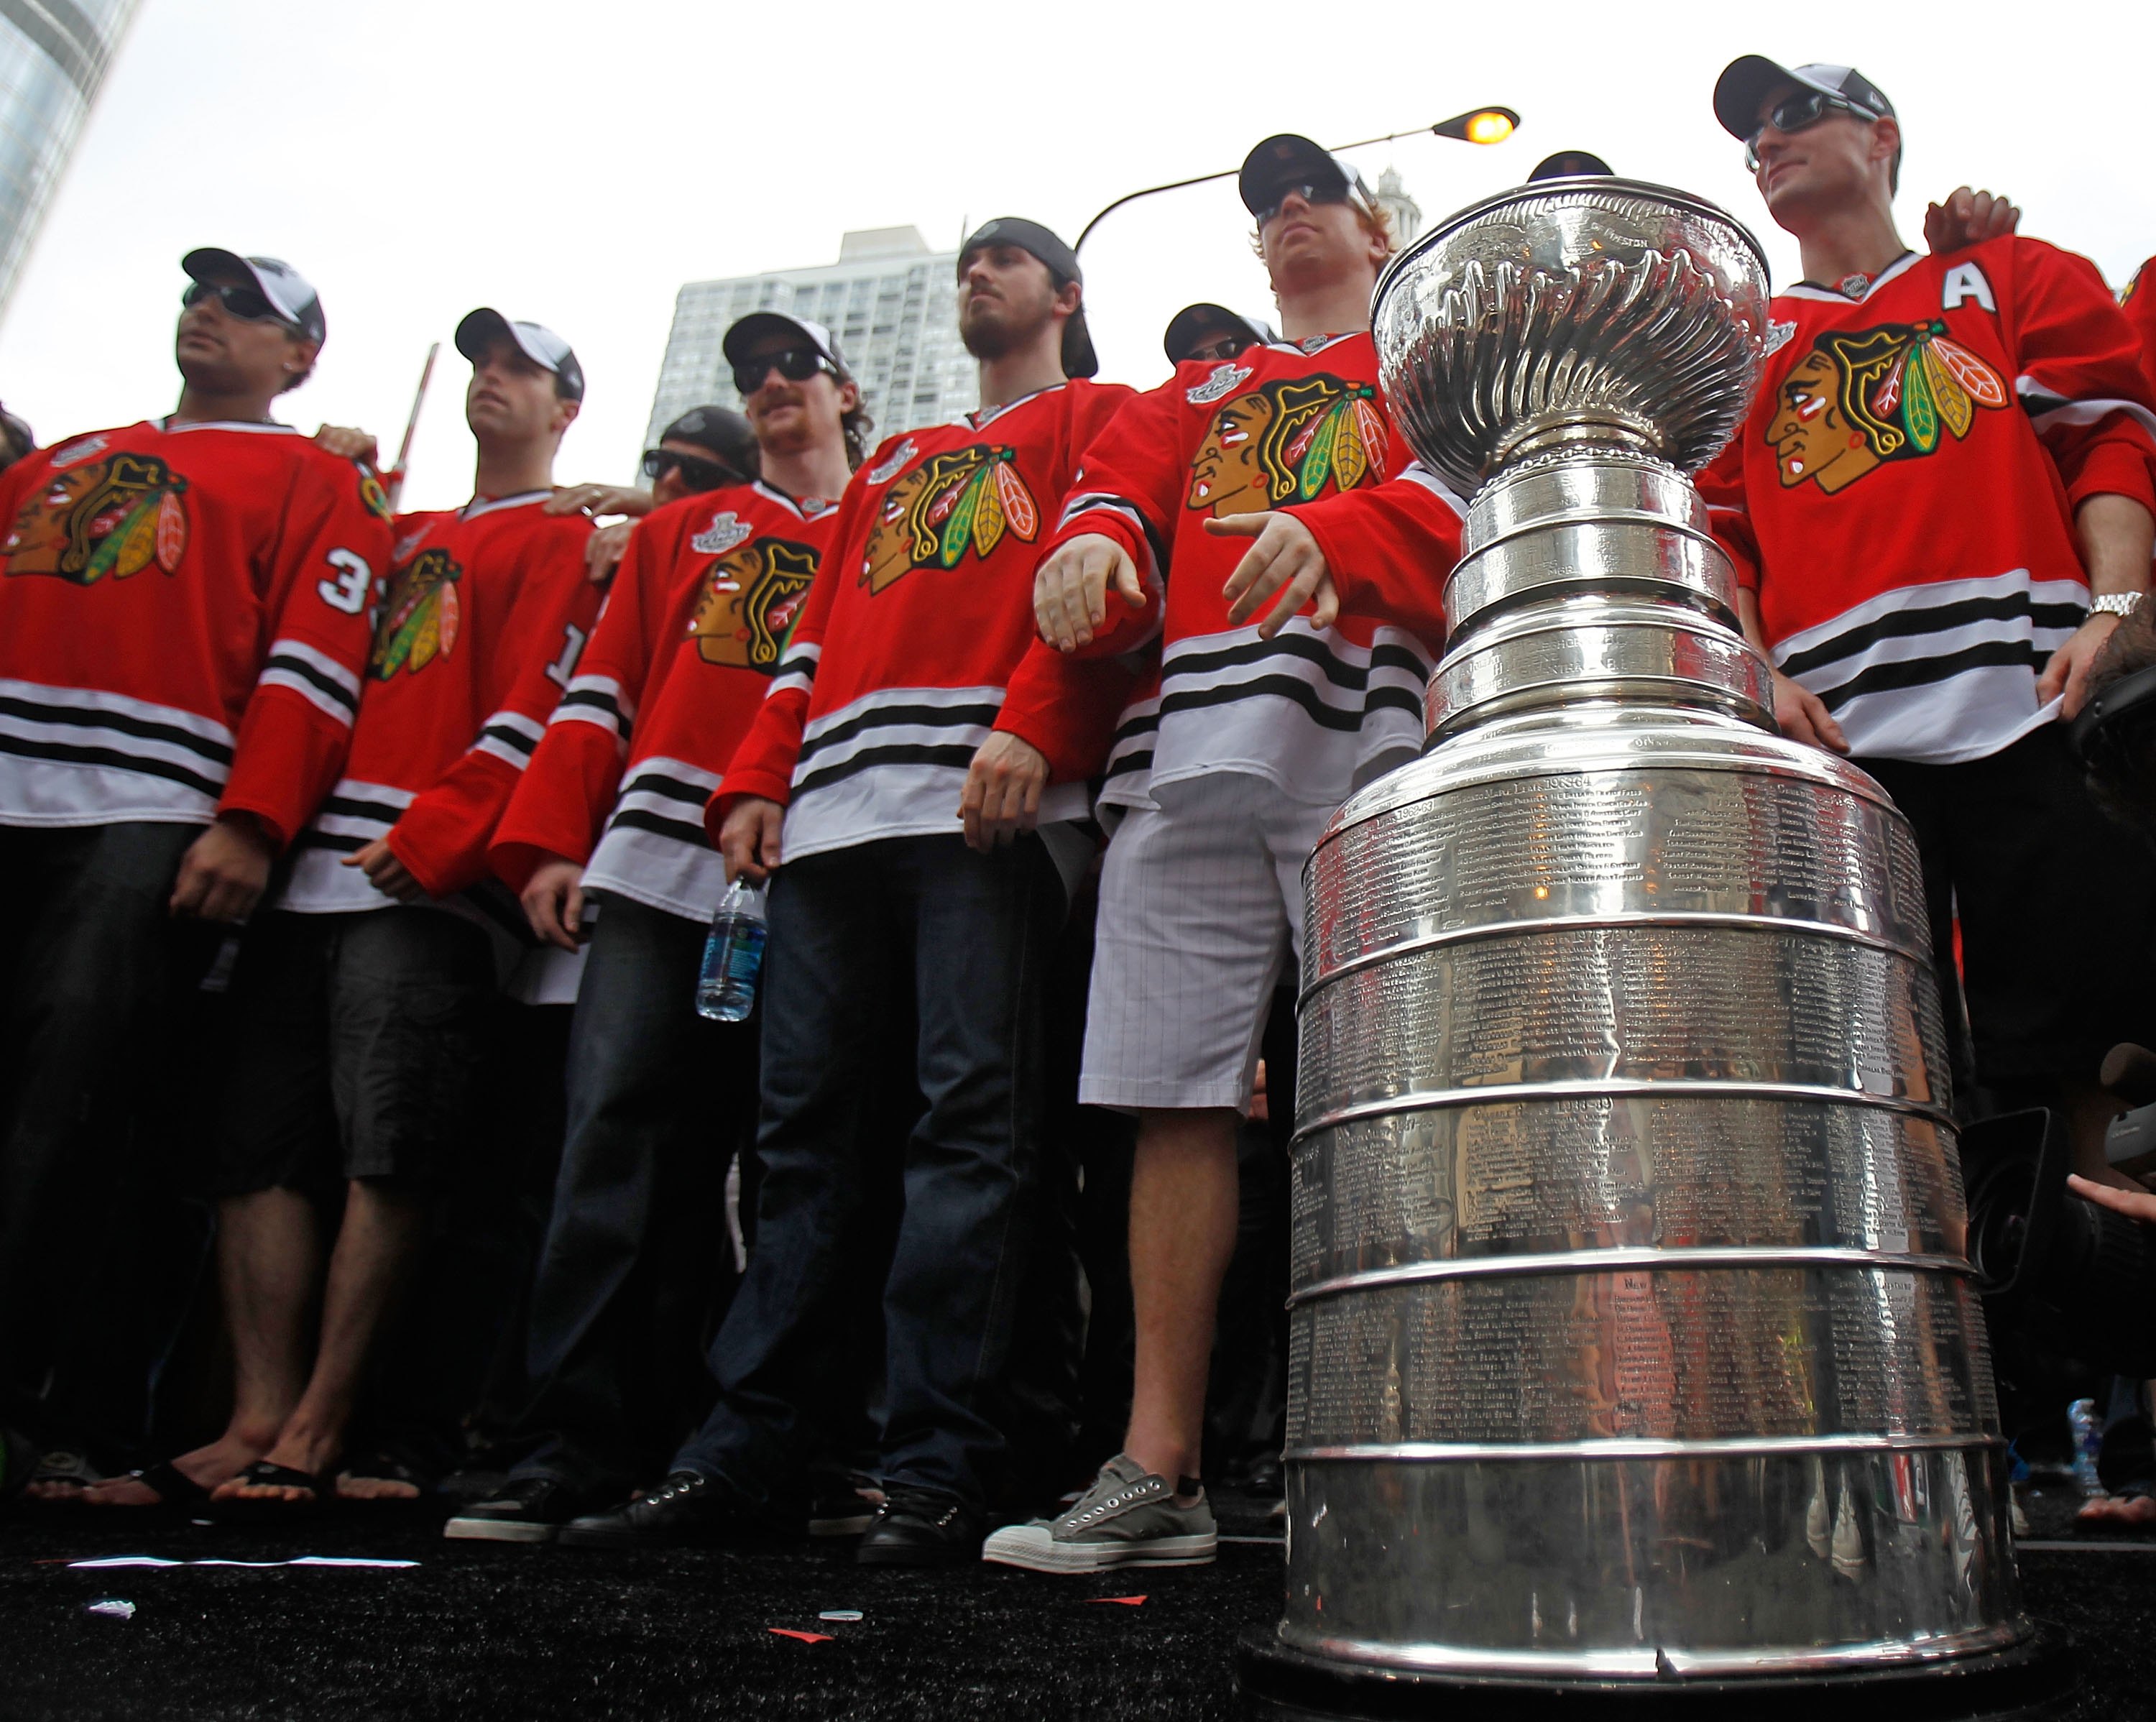 Top 10 NHL Stanley Cup Finals Moments of All Time